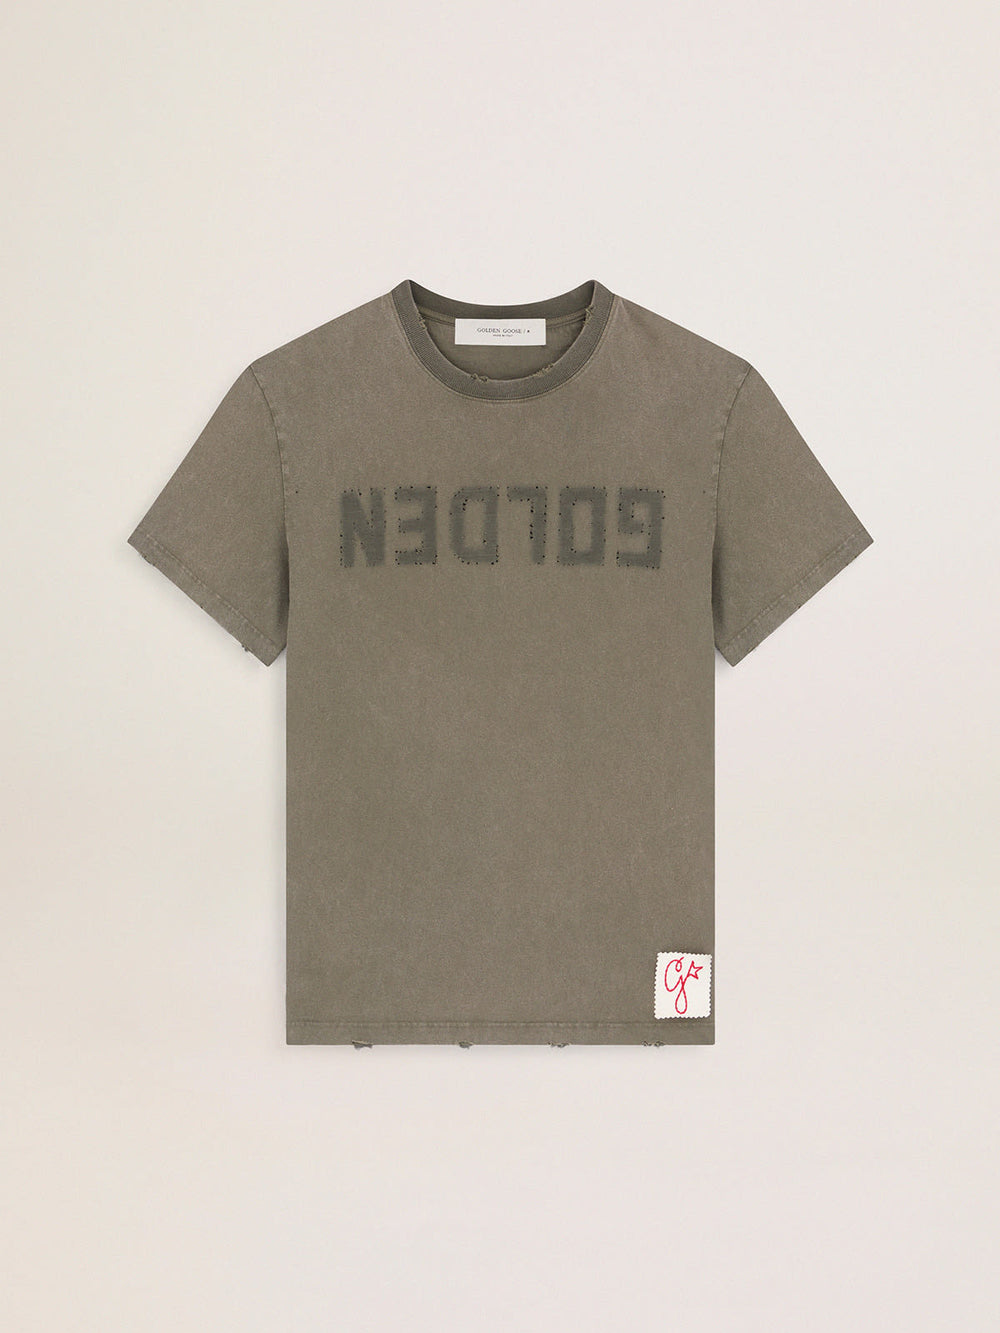 Regular T Shirt Distressed Cotton Jersey Dusty Olive